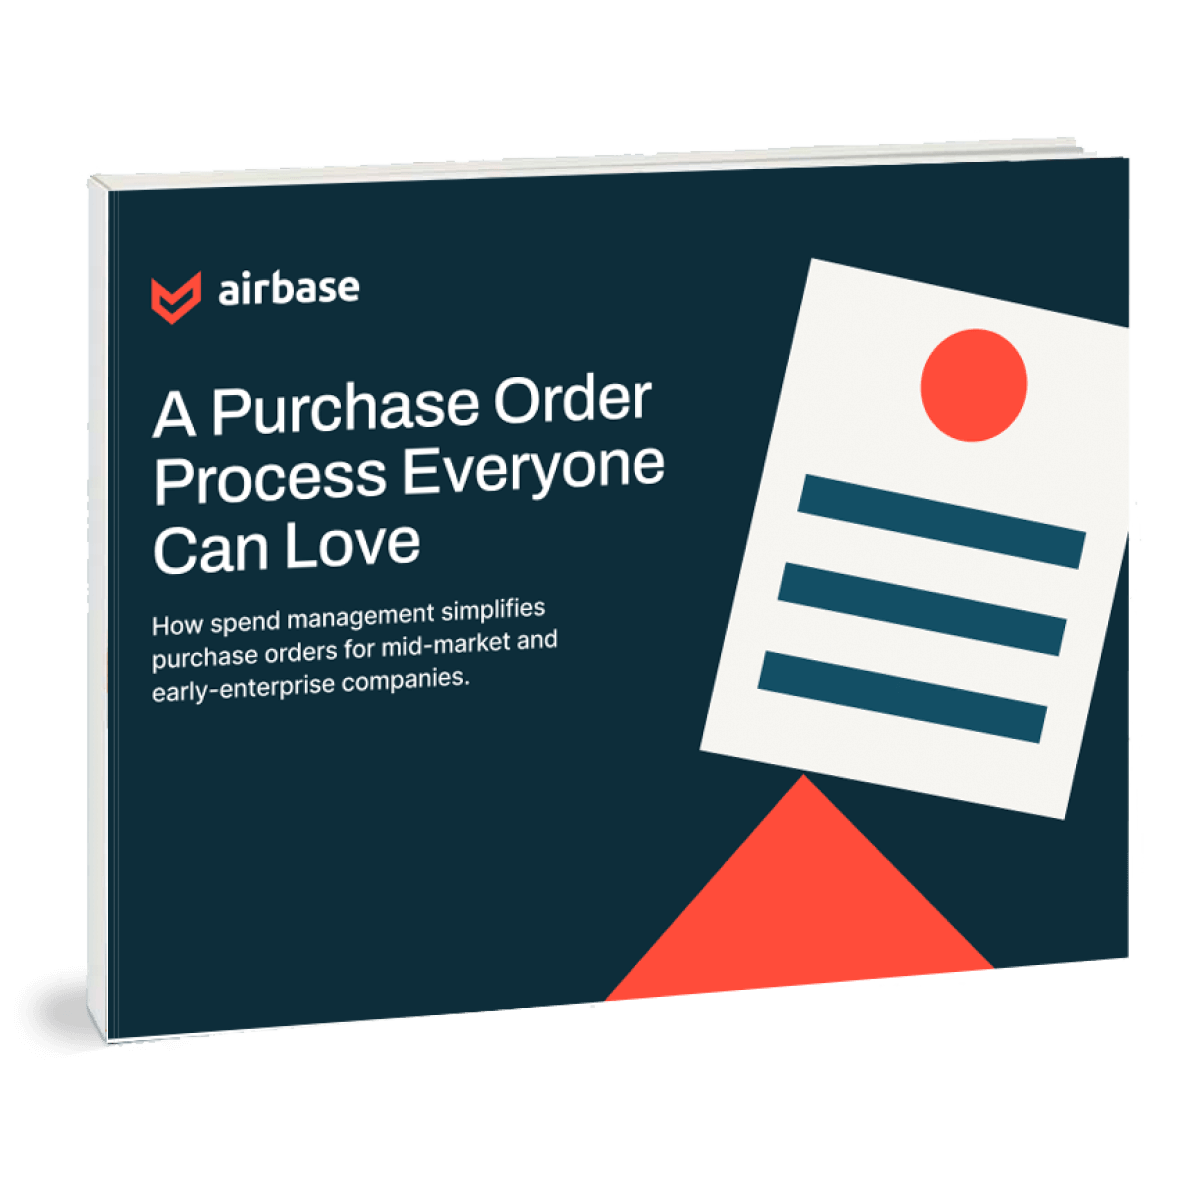 A Purchase Order Process Everyone Can Love